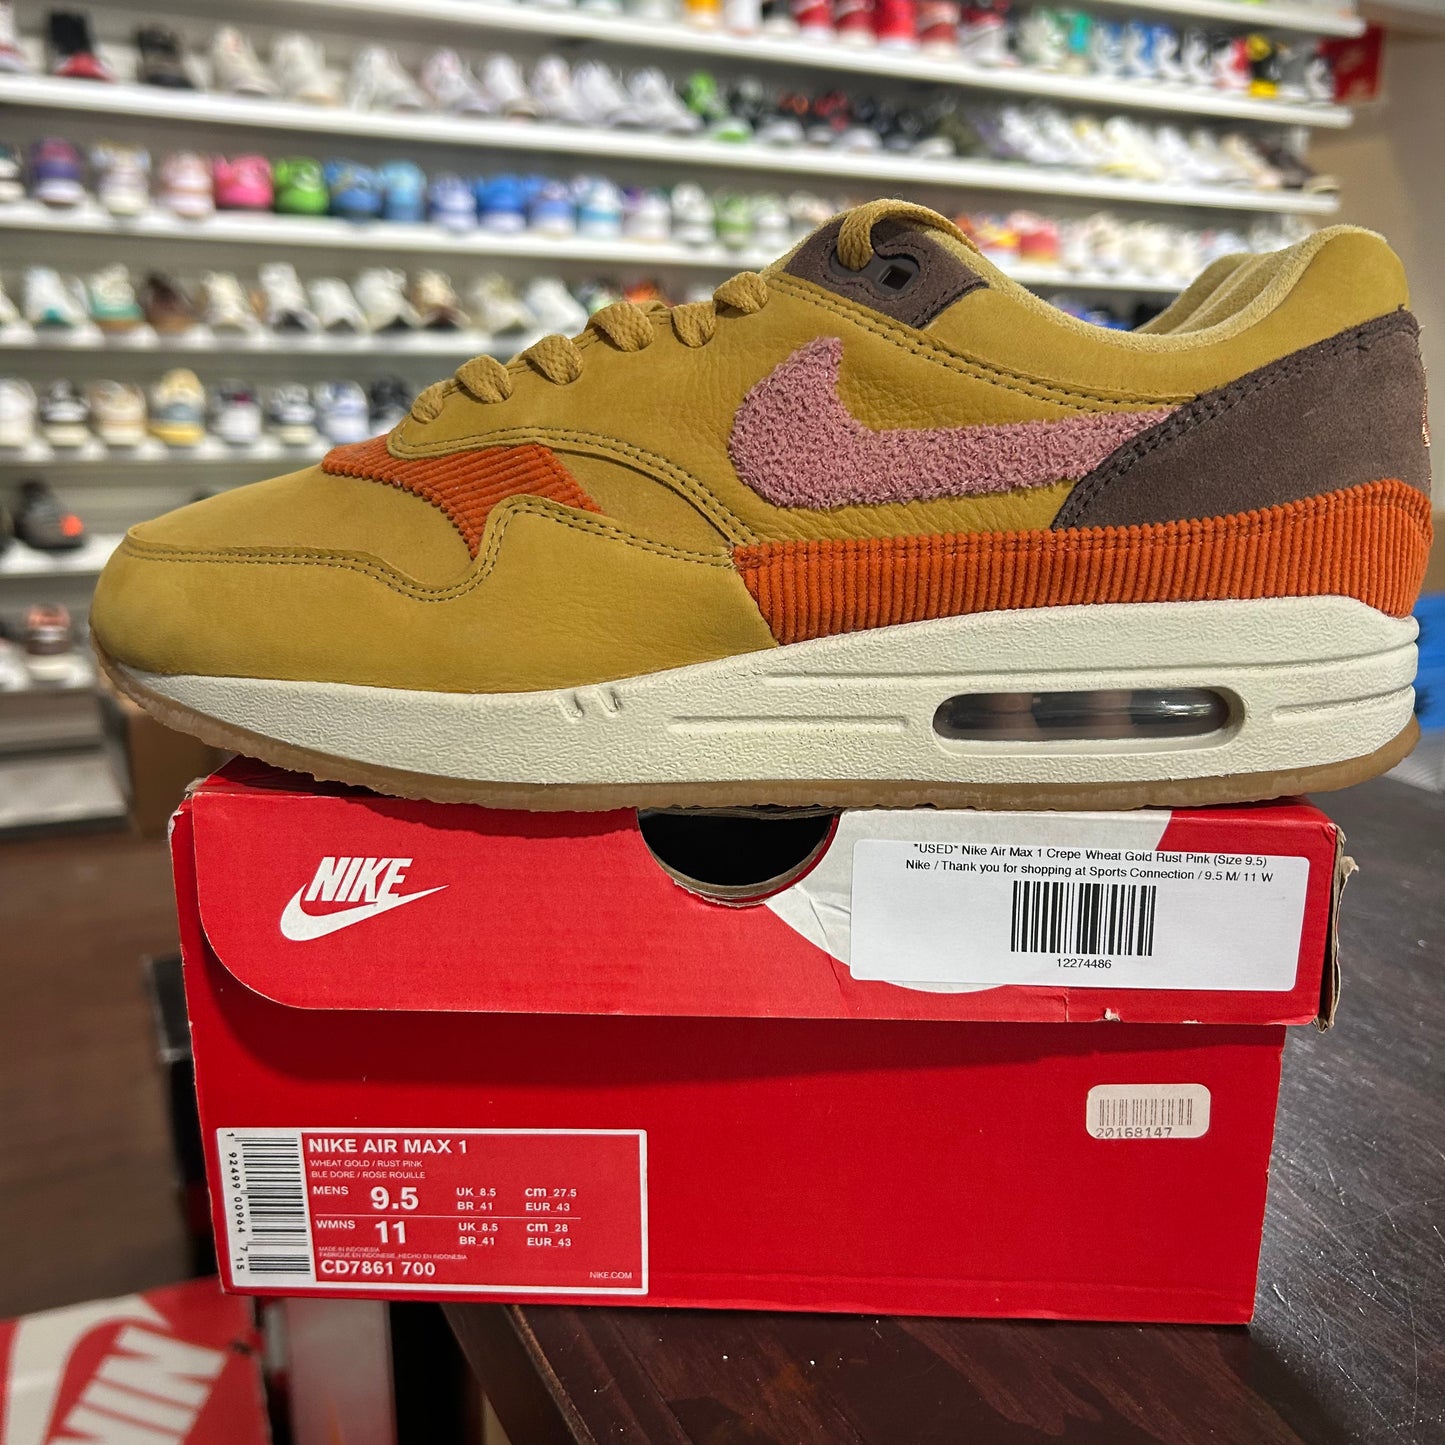 *USED* Nike Air Max 1 Crepe Wheat Gold Rust Pink (Size 9.5)